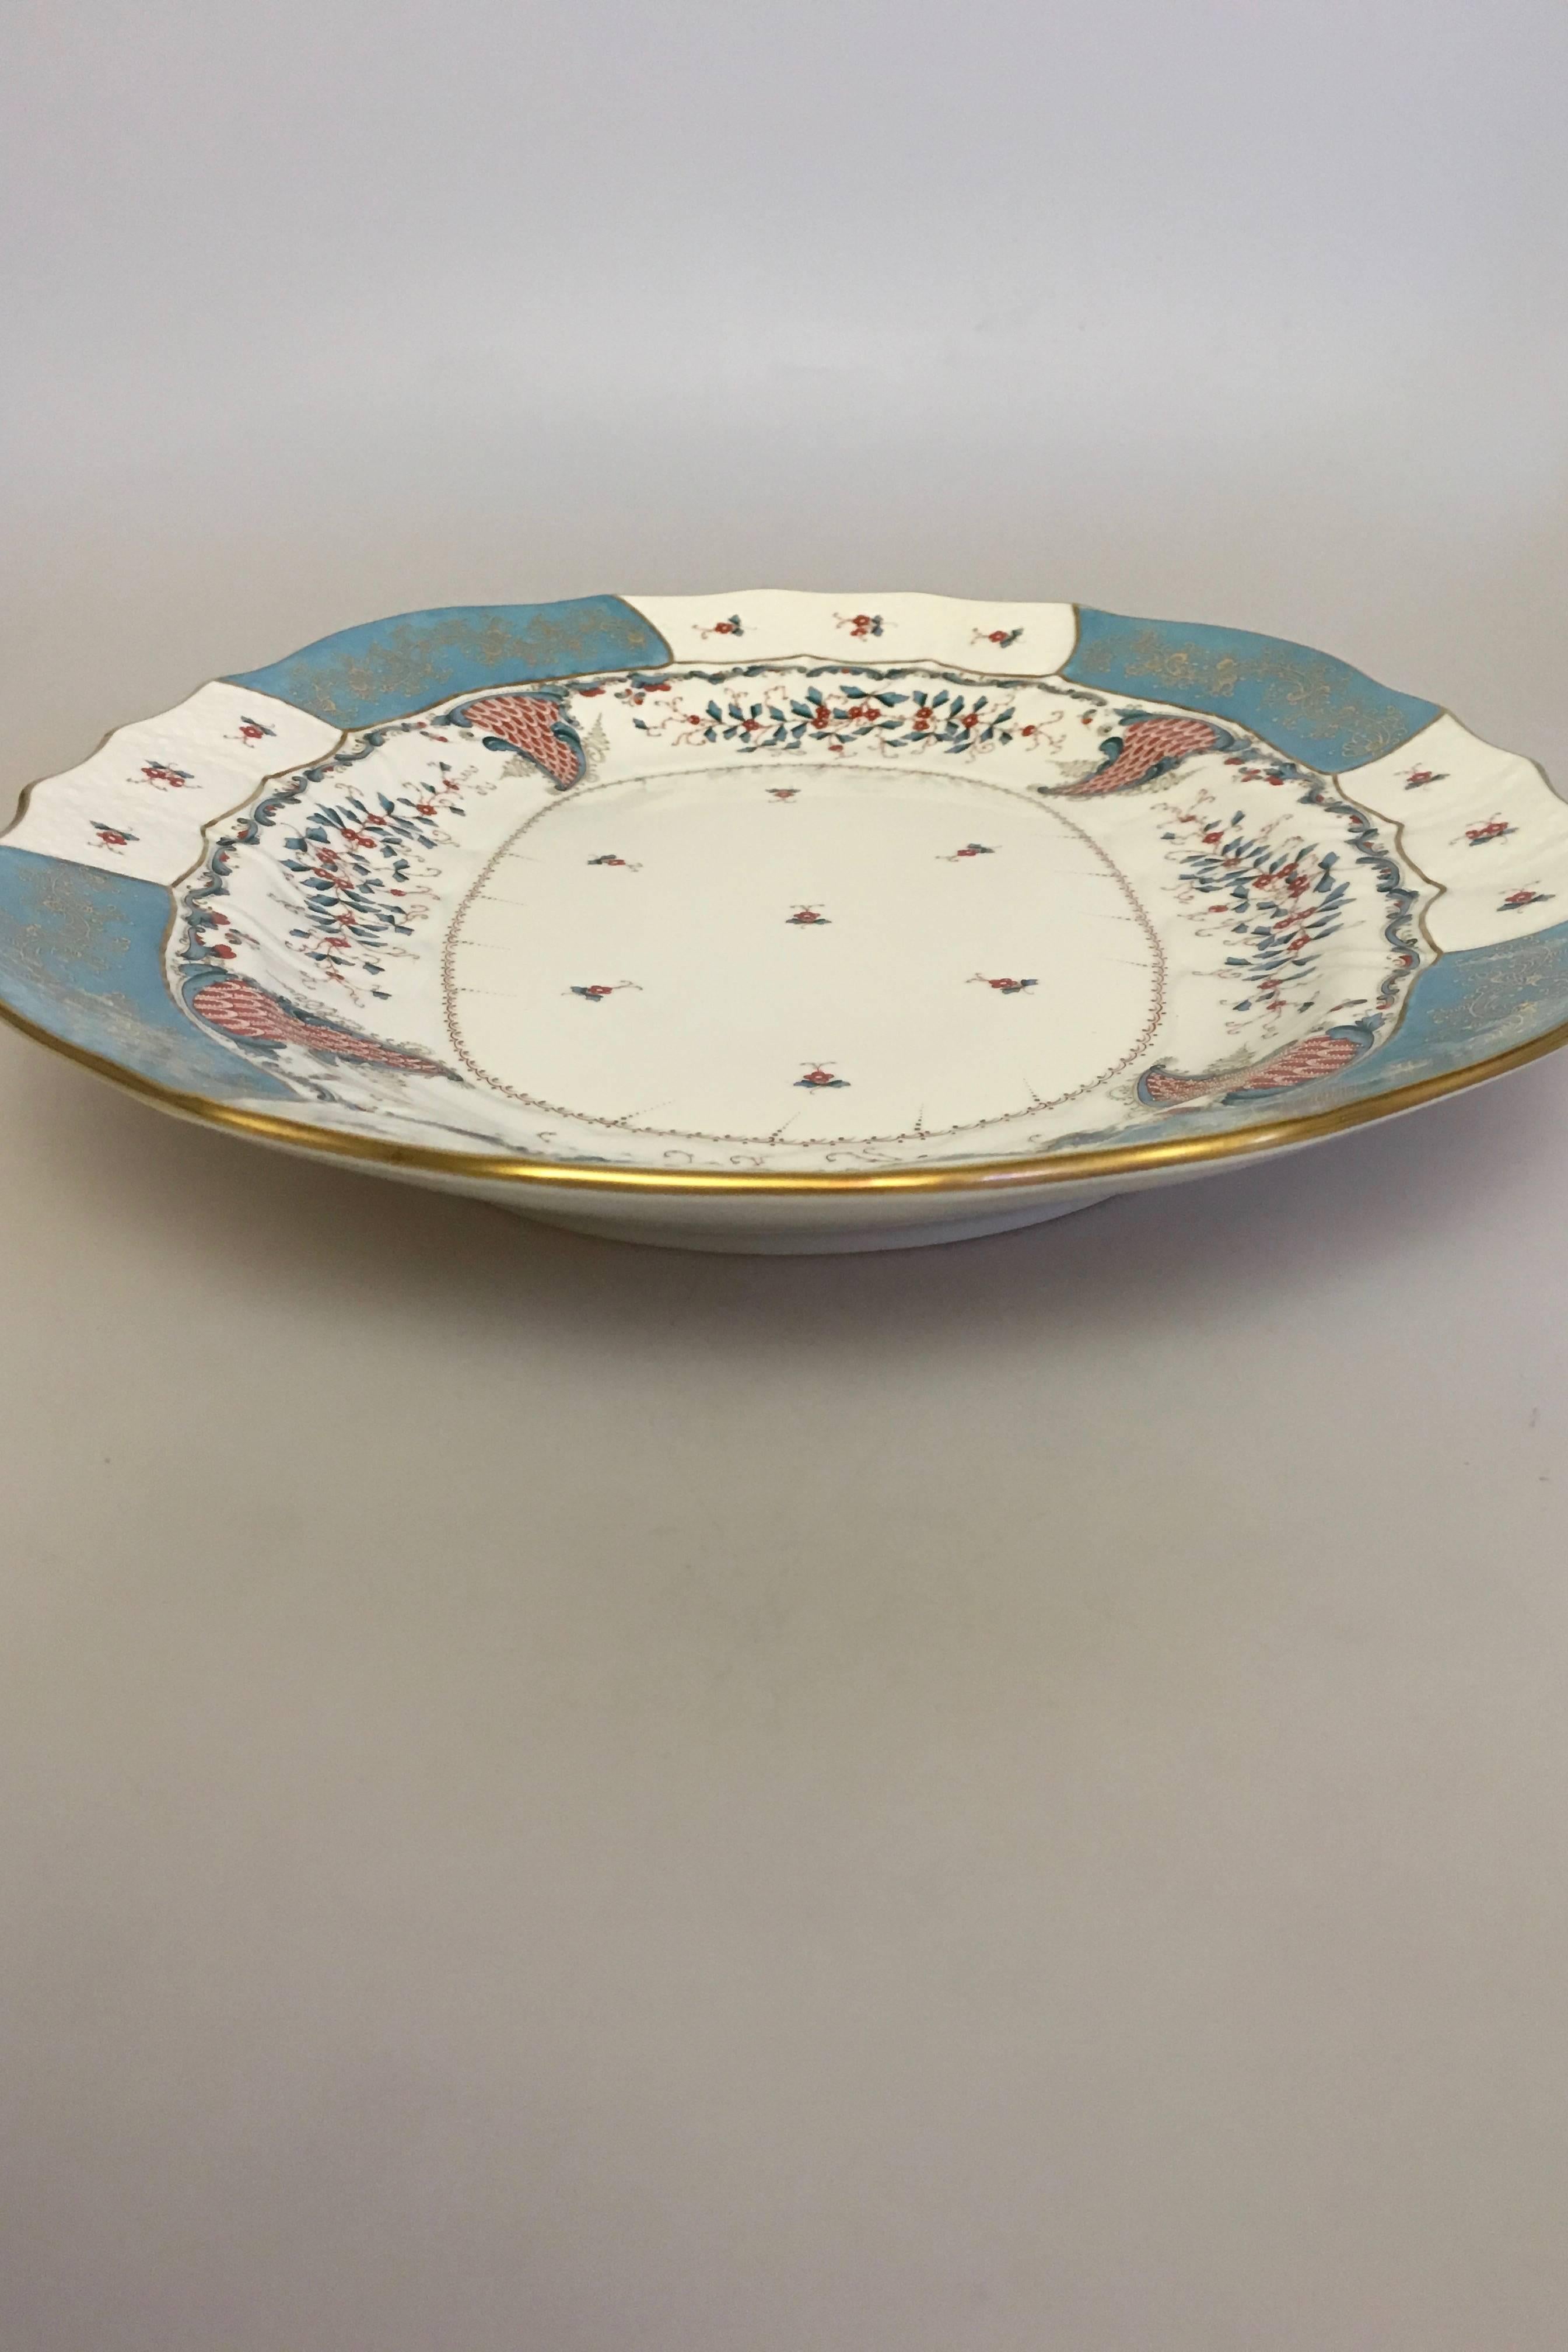 Herend Cornucopia (TCA) oval platter, Hungary #1101. Hungarian vintage Herend porcelain oval serving platter. Hand-painted with one of Herend's most magnificent pattern 